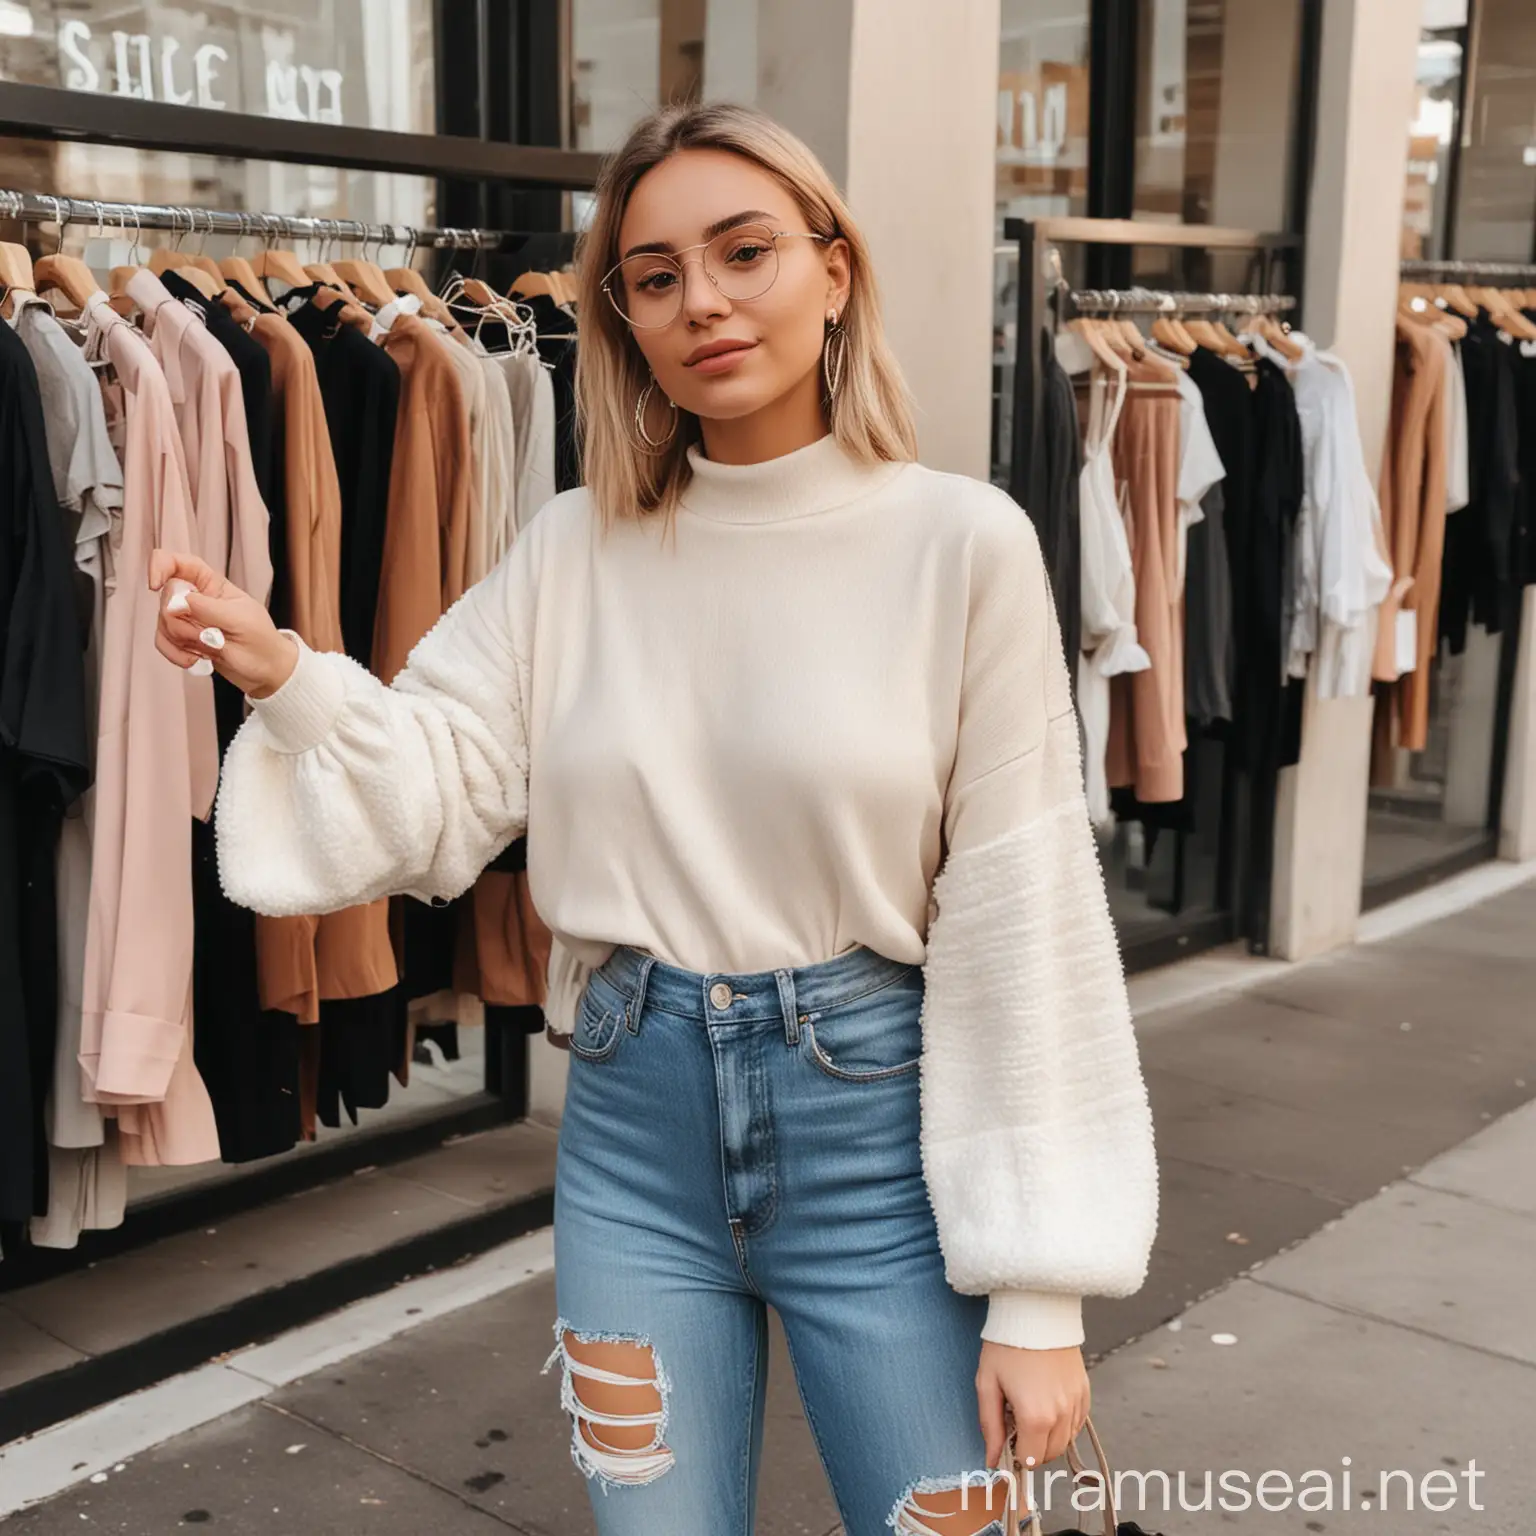 Instagram Post for young adults into fashion, Online Shopping Secrets, Finding Quality Fashion on a Budget, Fashion Trends